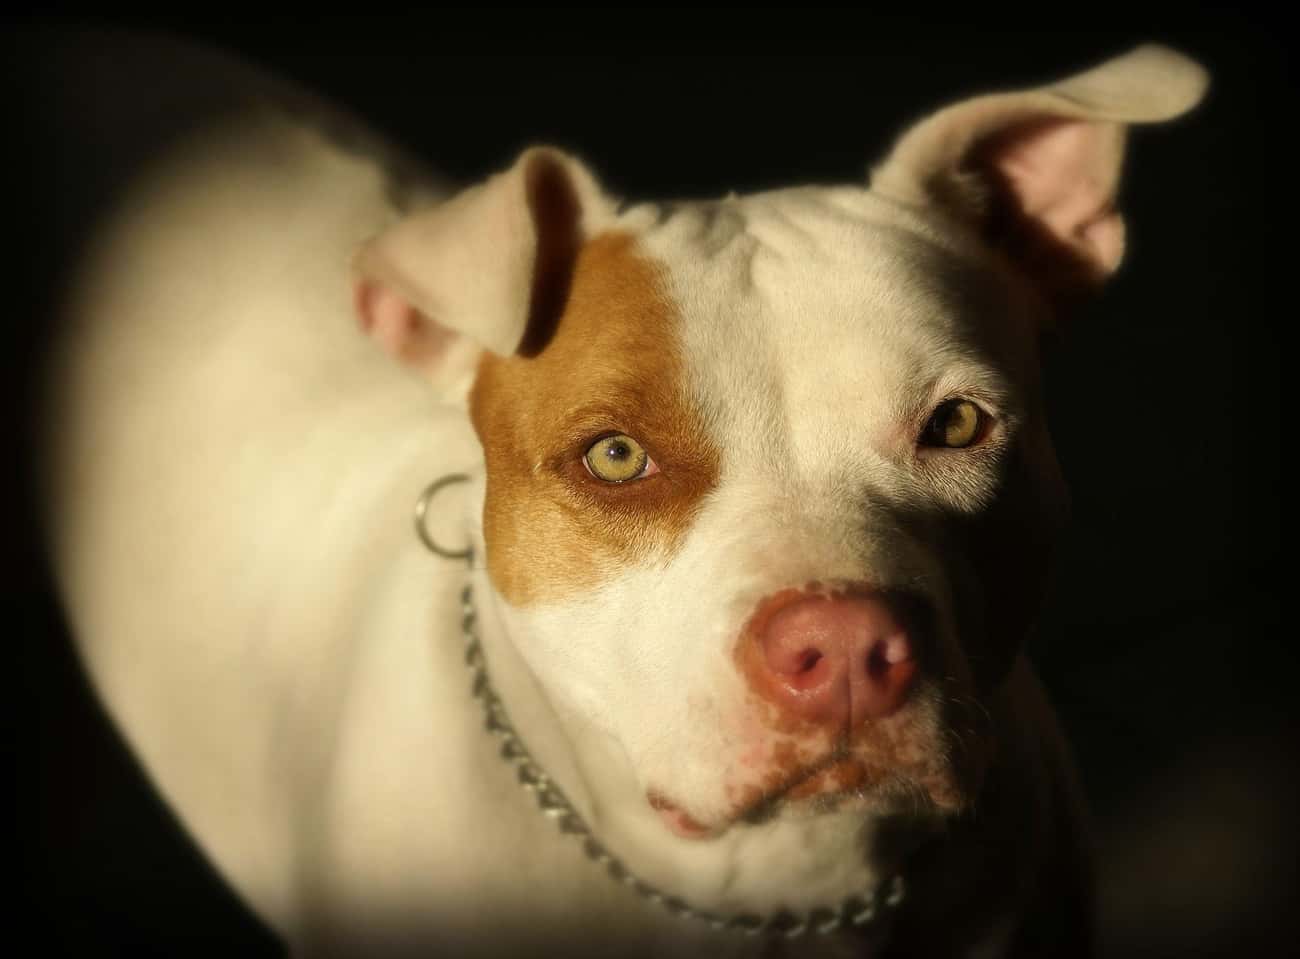 Scarface The Pitbull Mauled His Owner Over A Sweater